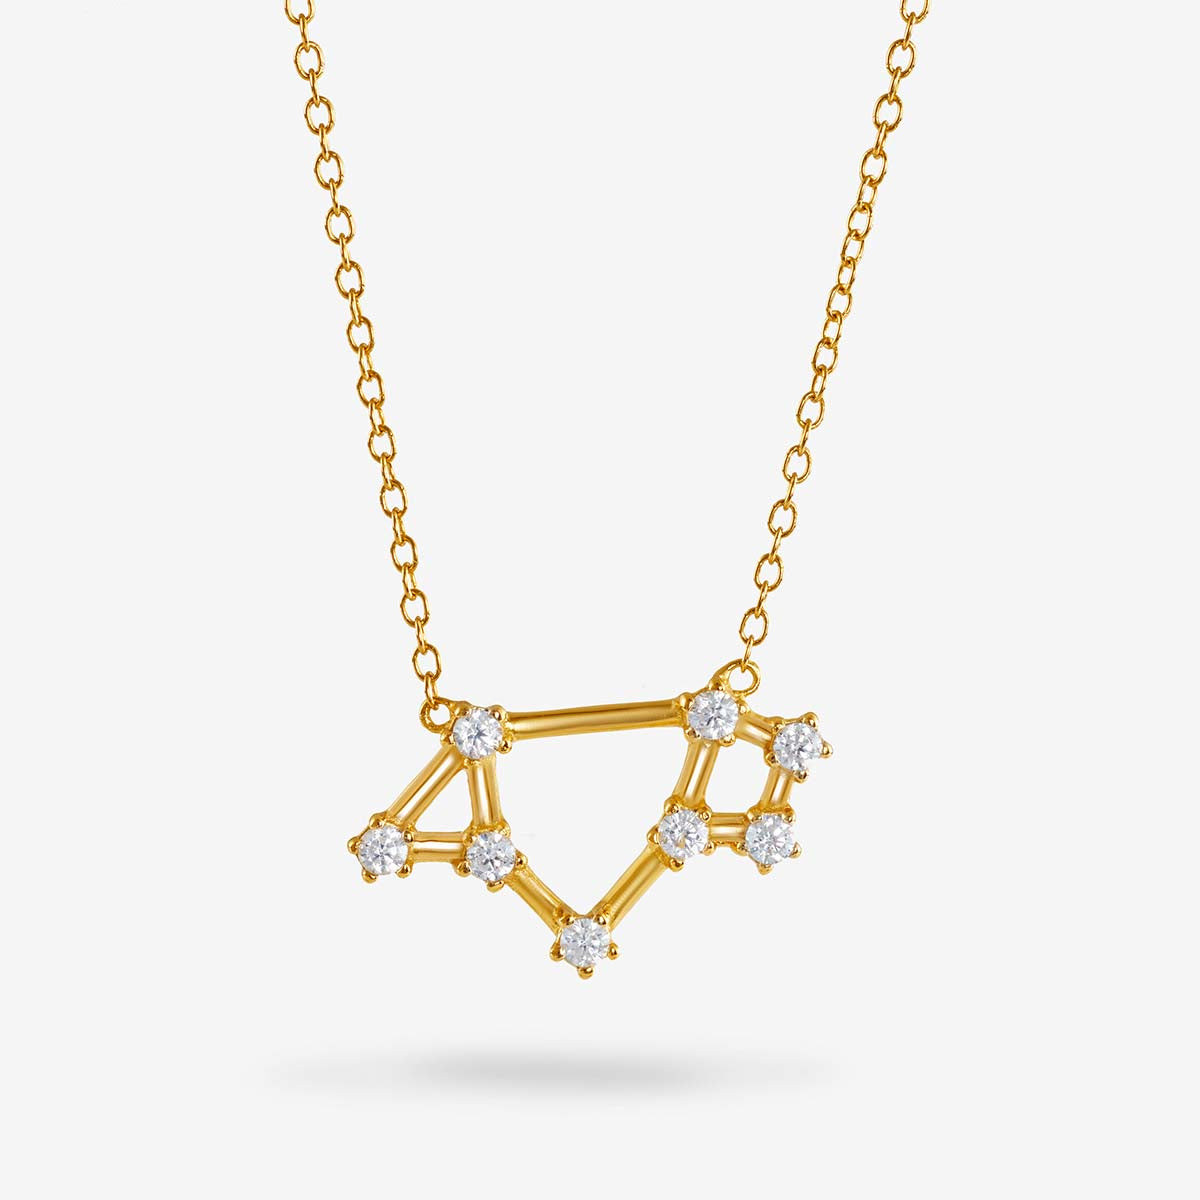 Sagitarius – Astrology Sign Necklaces – 18kt Gold-Plated at GLAMBOU